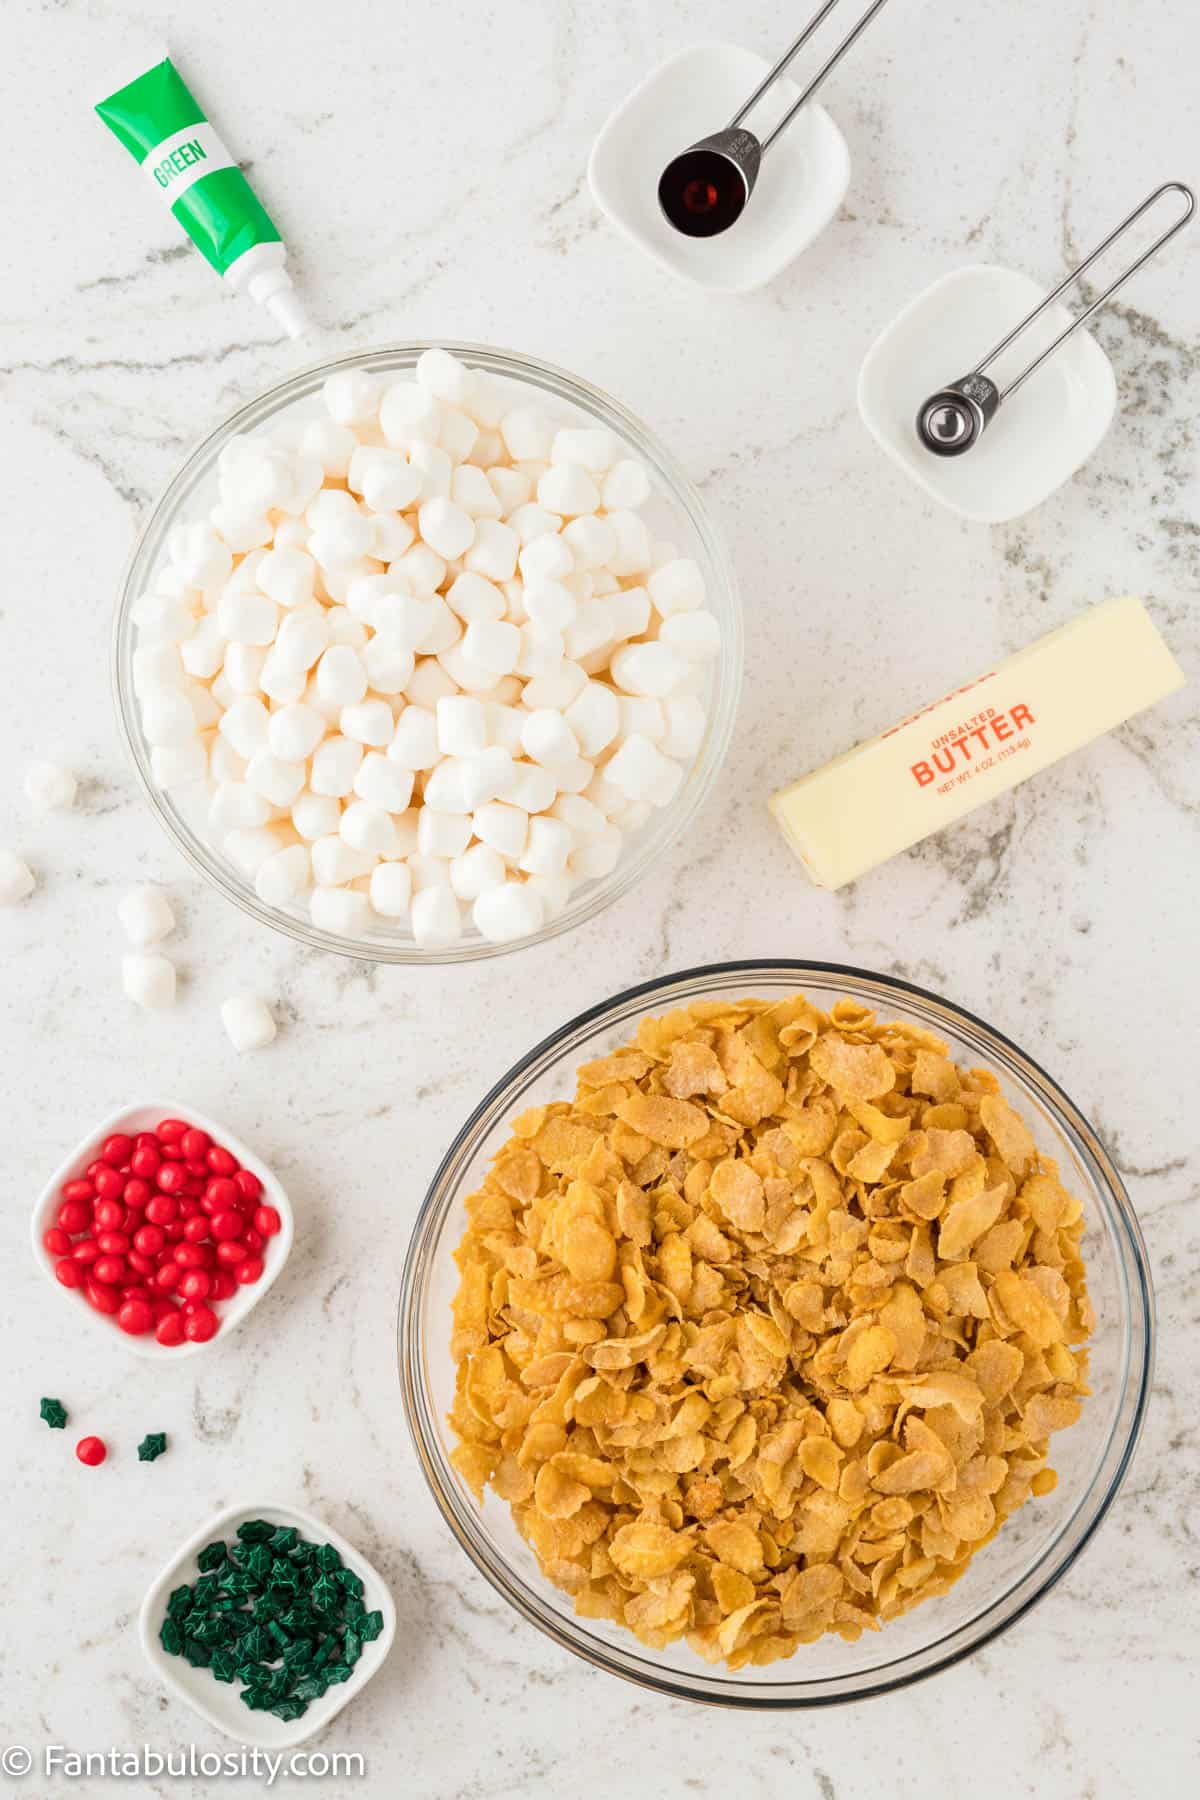 The ingredients to make cornflake wreath cookies are displayed in bowls on a white marble countertop